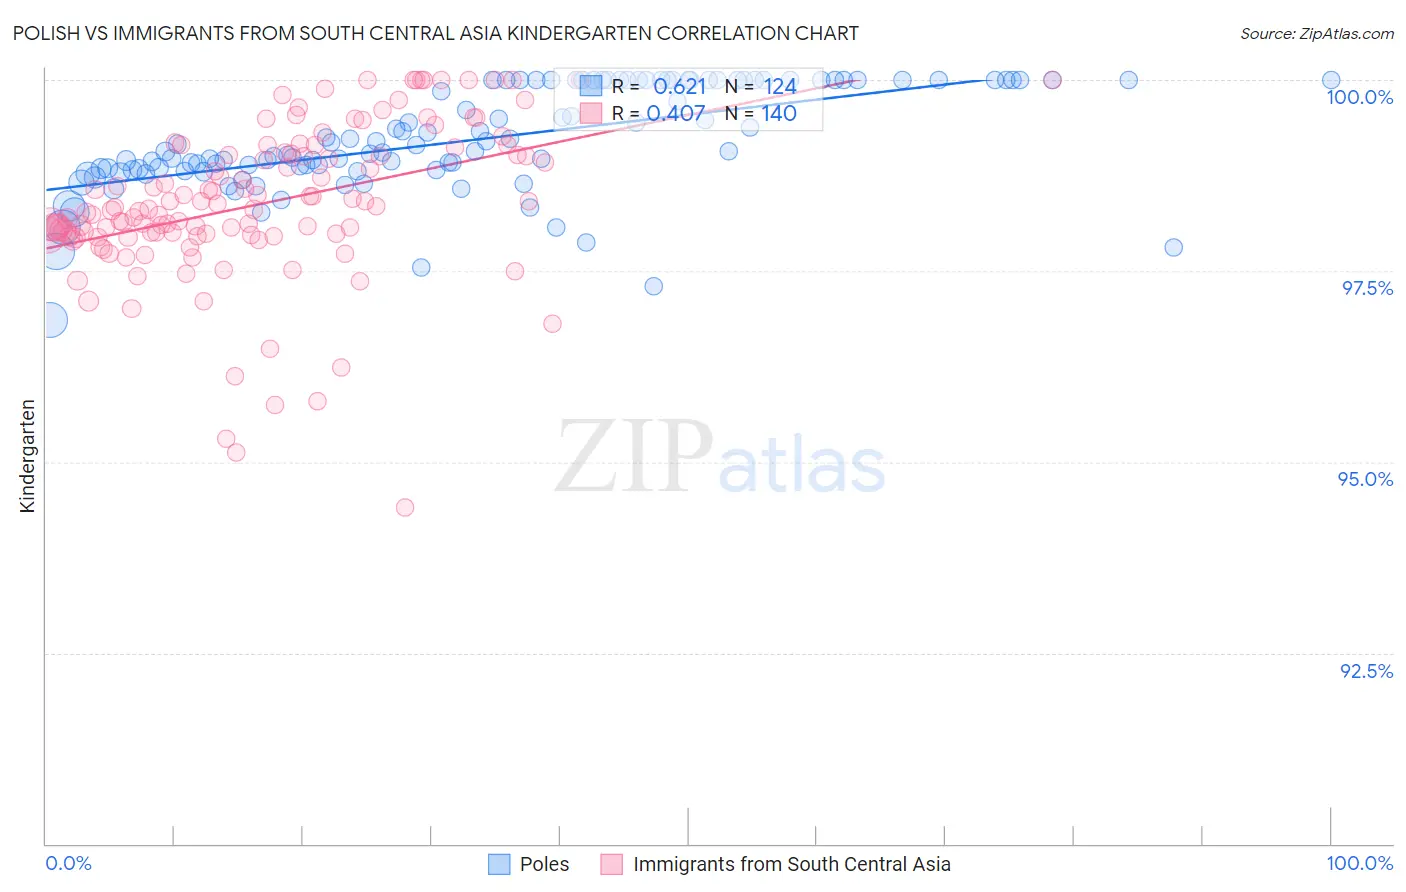 Polish vs Immigrants from South Central Asia Kindergarten